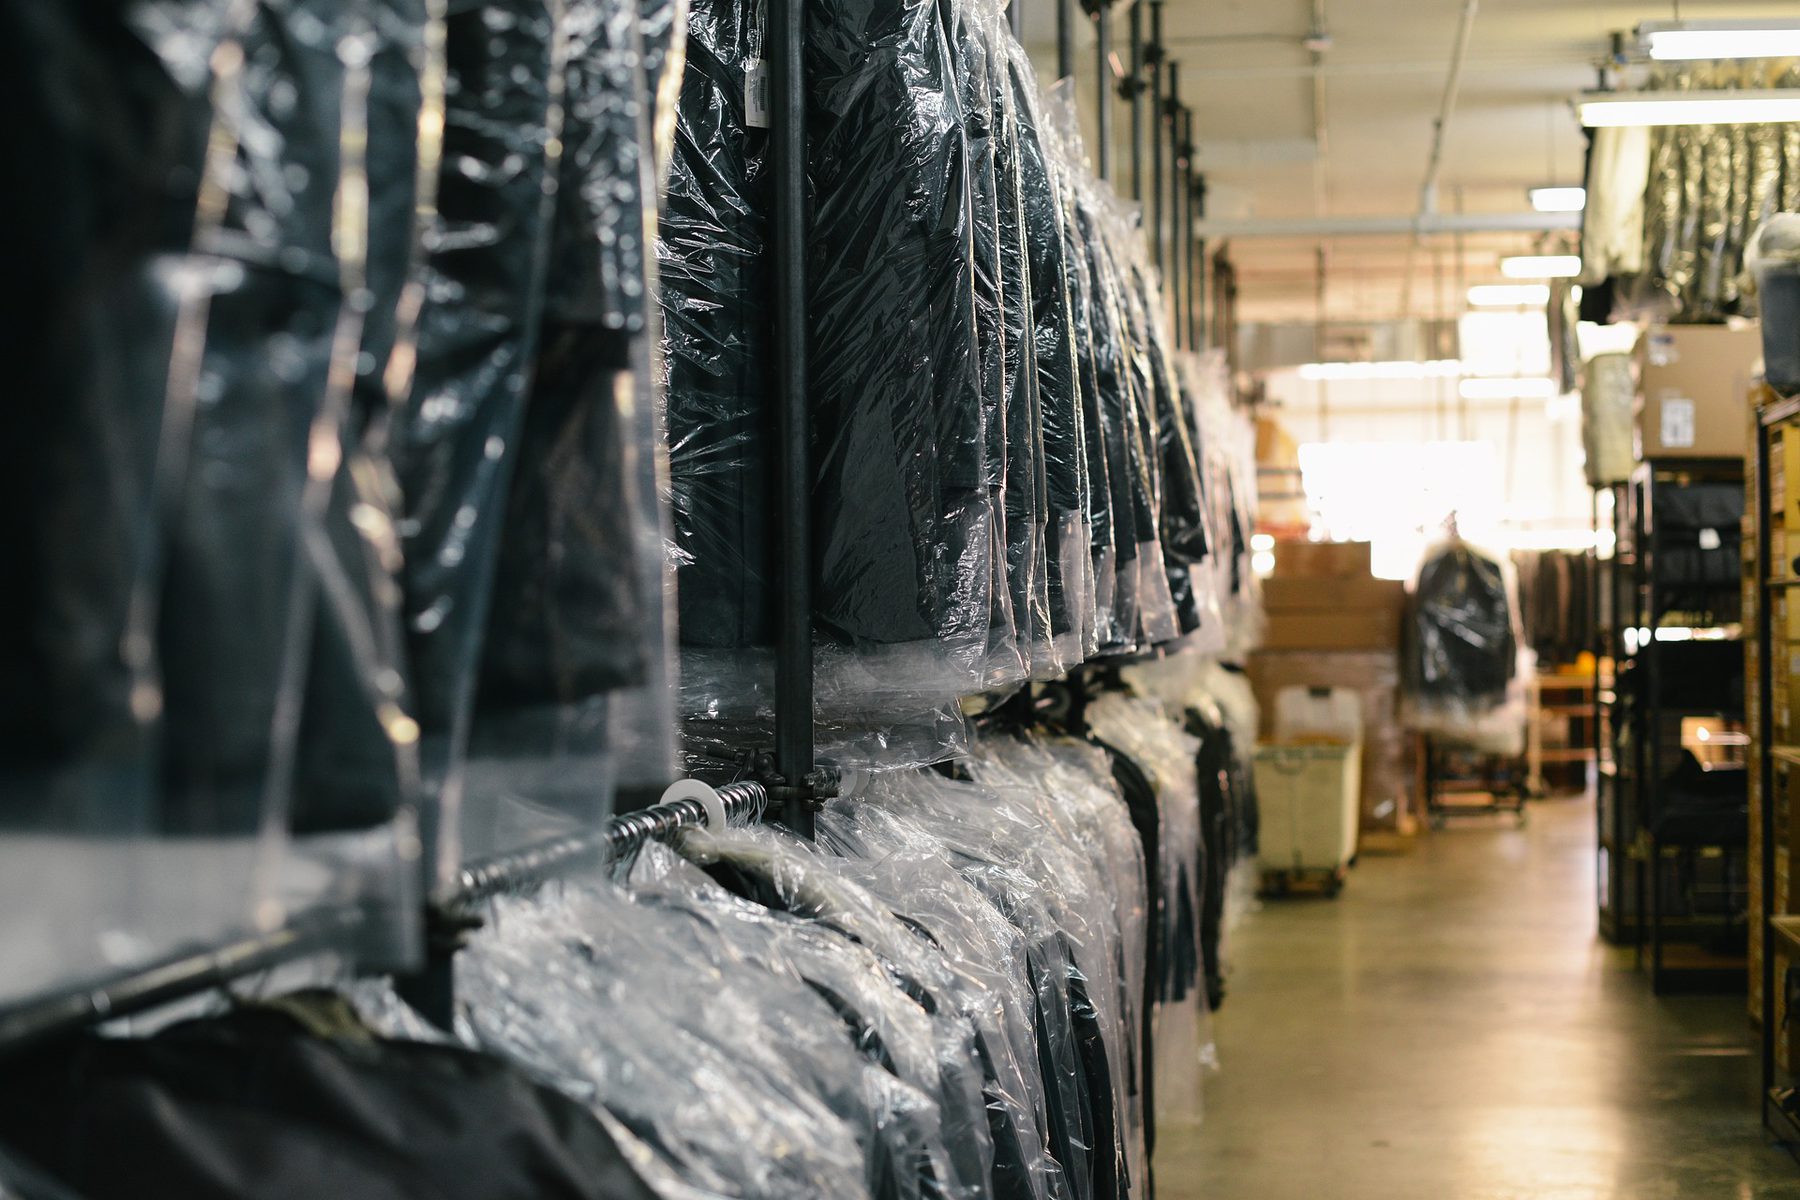 Job Role Image (Warehouse Manager: Clothing Stock in Warehouse)